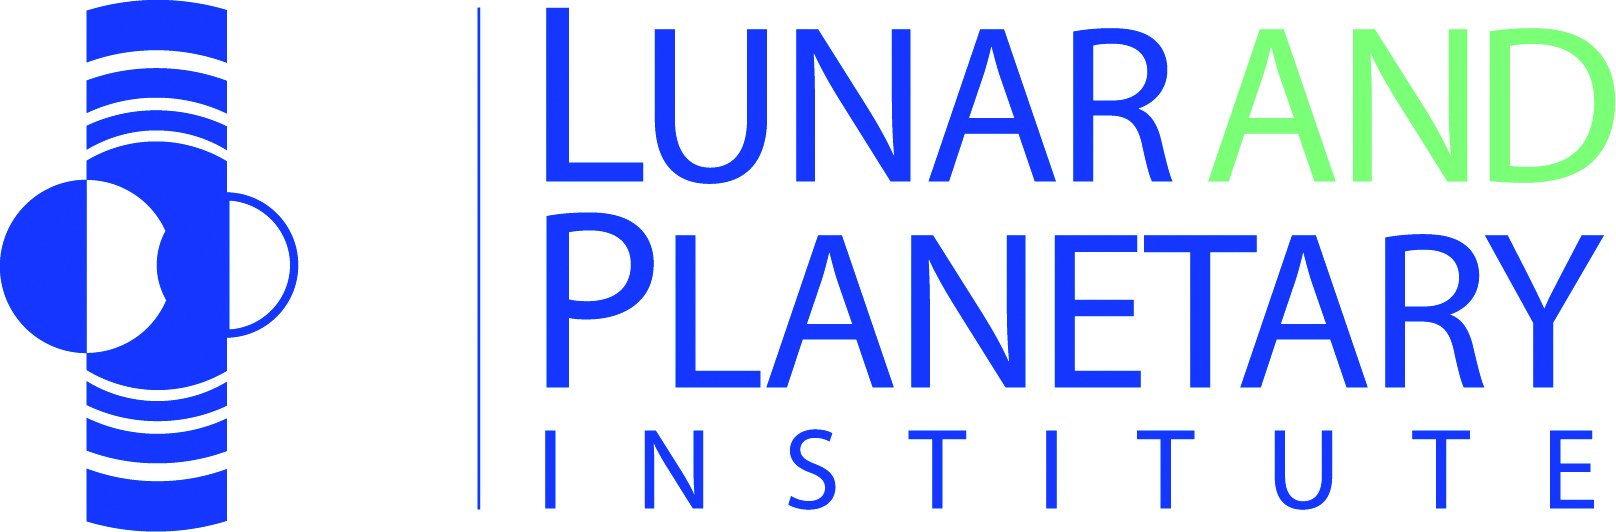 Lunar And Planetary Institute Logo